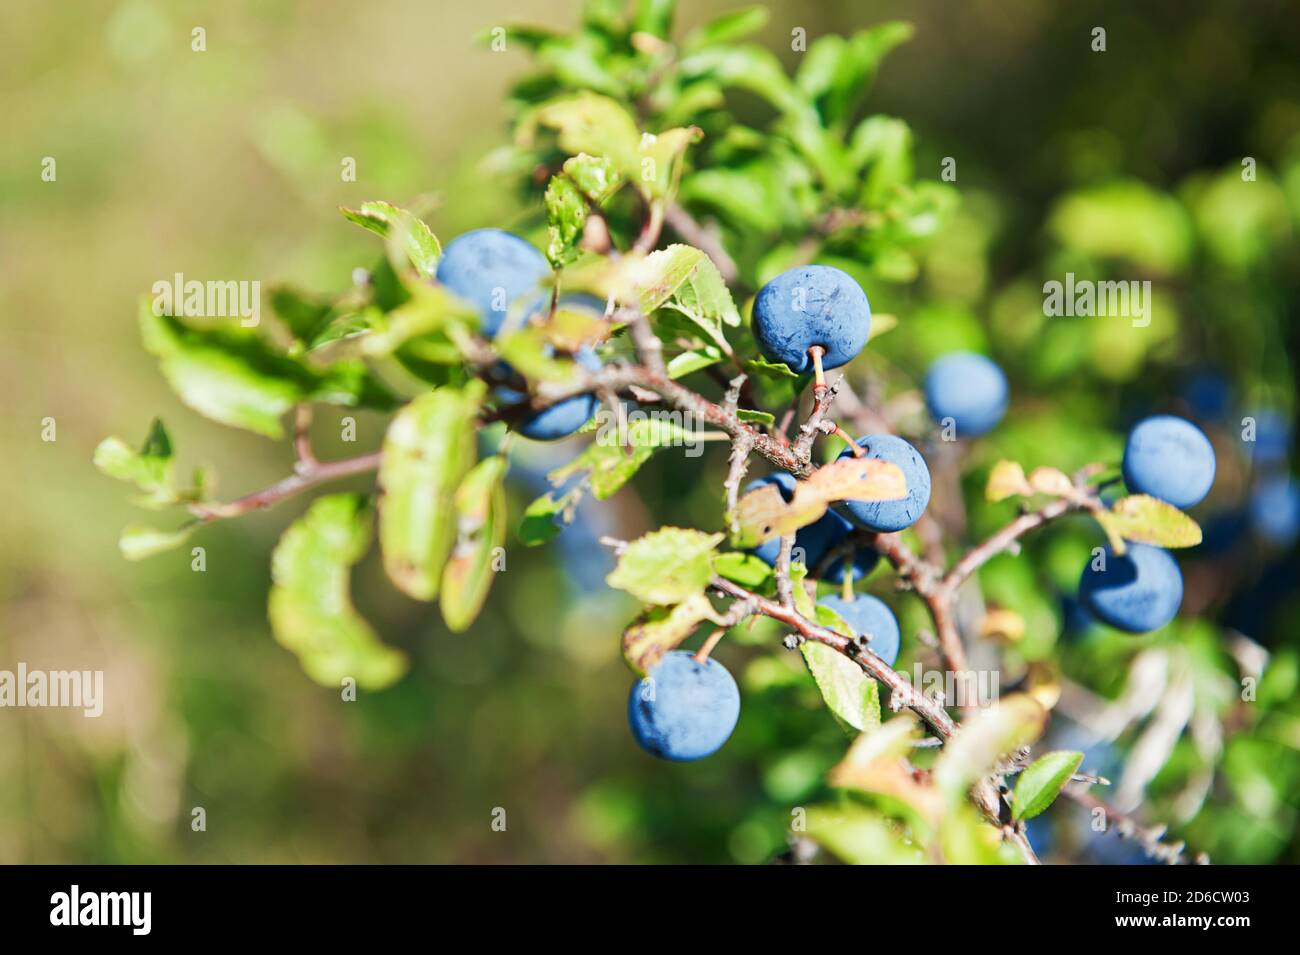 Detailed photo of ripe fresh sloe berries growing on a tree with a shallow DOF Stock Photo